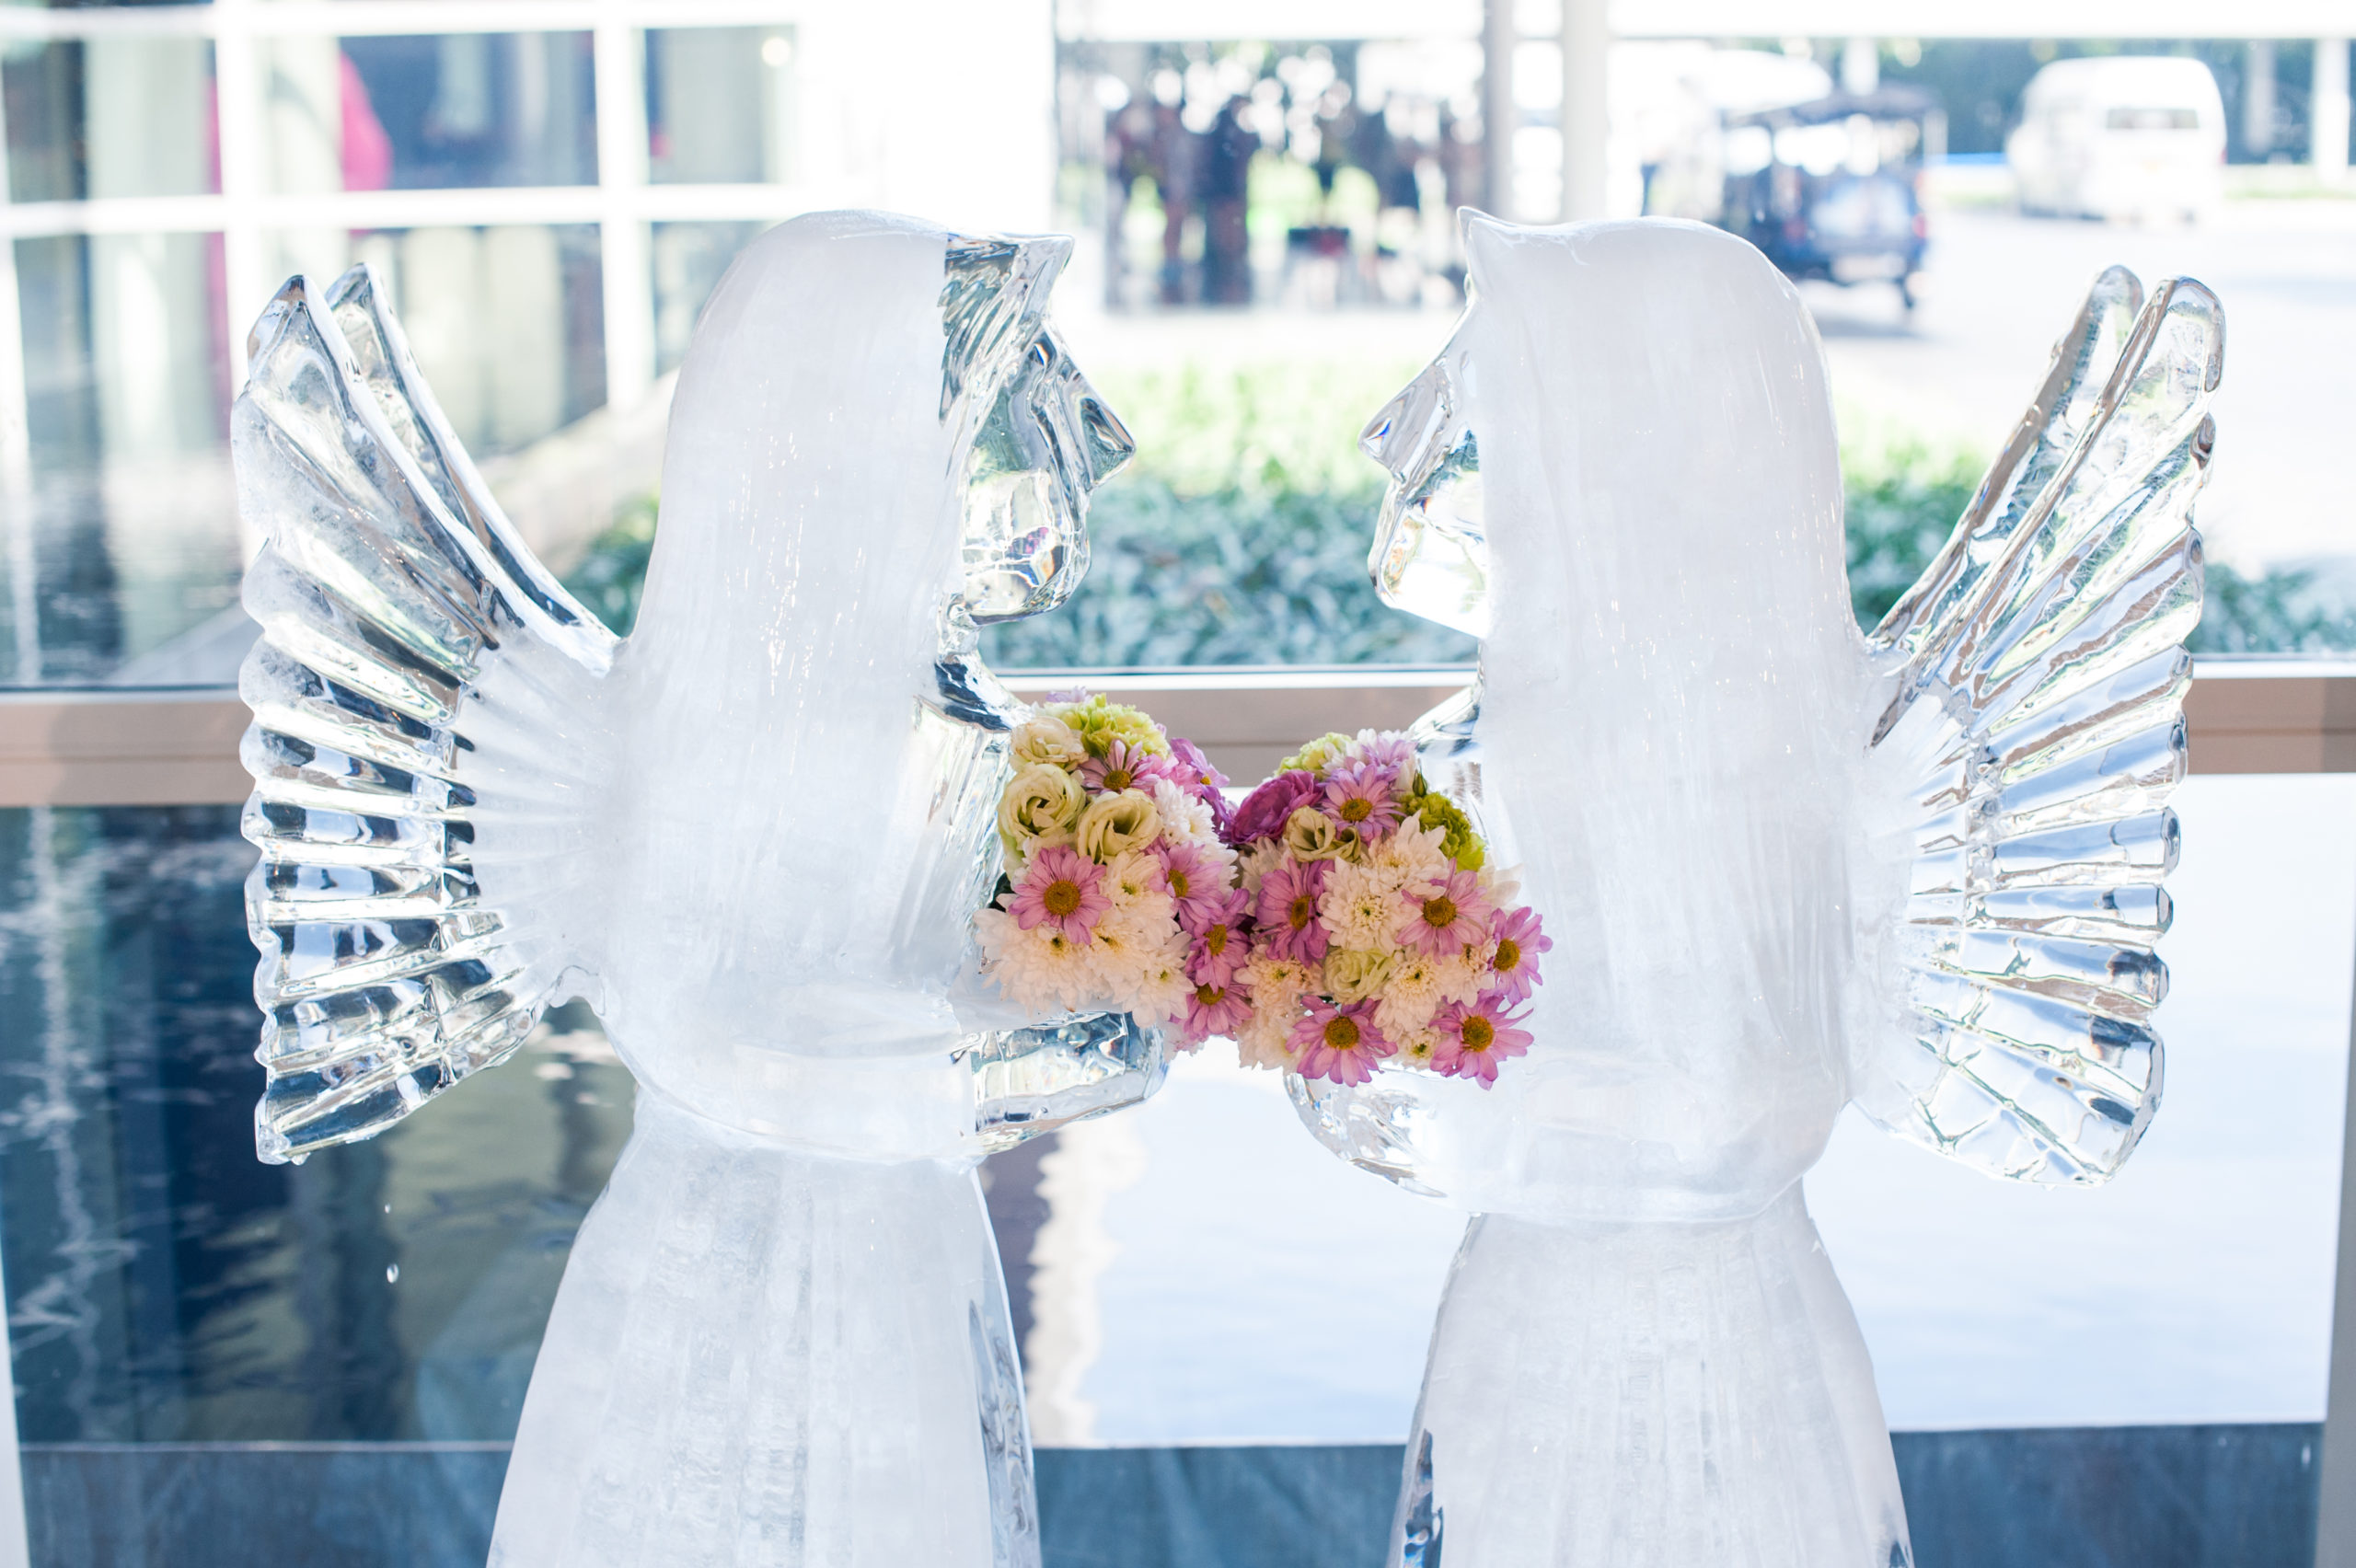 2 ice sculptures holding flowers for a wedding for bella mansions blog